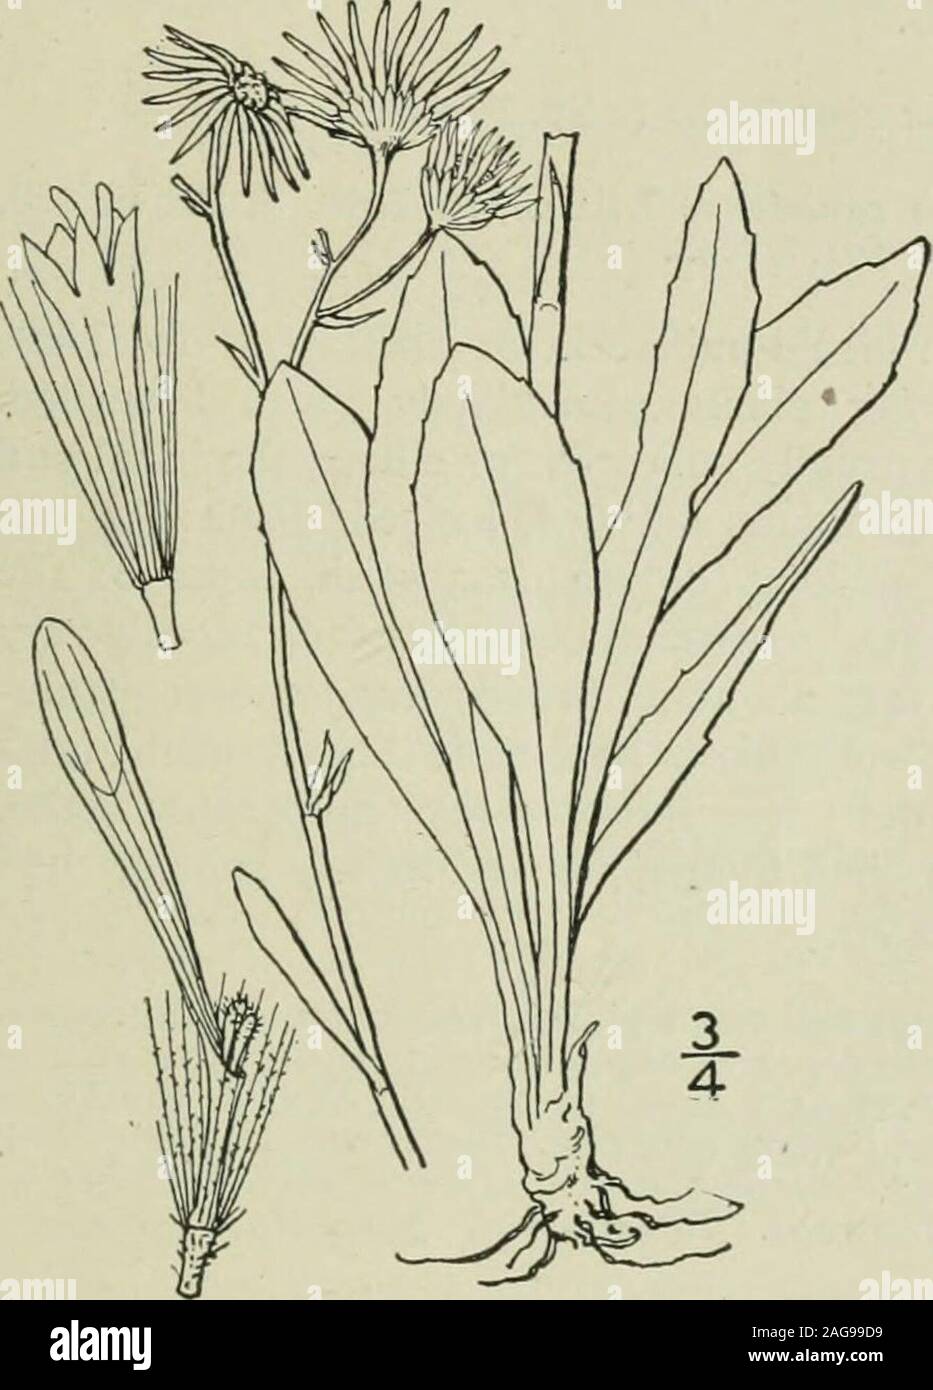 . An illustrated flora of the northern United States, Canada and the British possessions : from Newfoundland to the parallel of the southern boundary of Virginia and from the Atlantic Ocean westward to the 102nd meridian. creglabrous or nearly so; pappus similar to that ofthe preceding; rays white, or sometimes purplish,occasionally minute or wanting. In fields. Nova Scotia to British Columbia, Florida,Louisiana, Texas and California. Naturalized inEurope. White-top. May-Nov. Genus 35. THISTLE FAMILY. 15. Erigeron tenuis T. & G. Slender RoughFleabane. Fig. 4375. Erigeron tenuis T. & G. Fl. N. Stock Photo